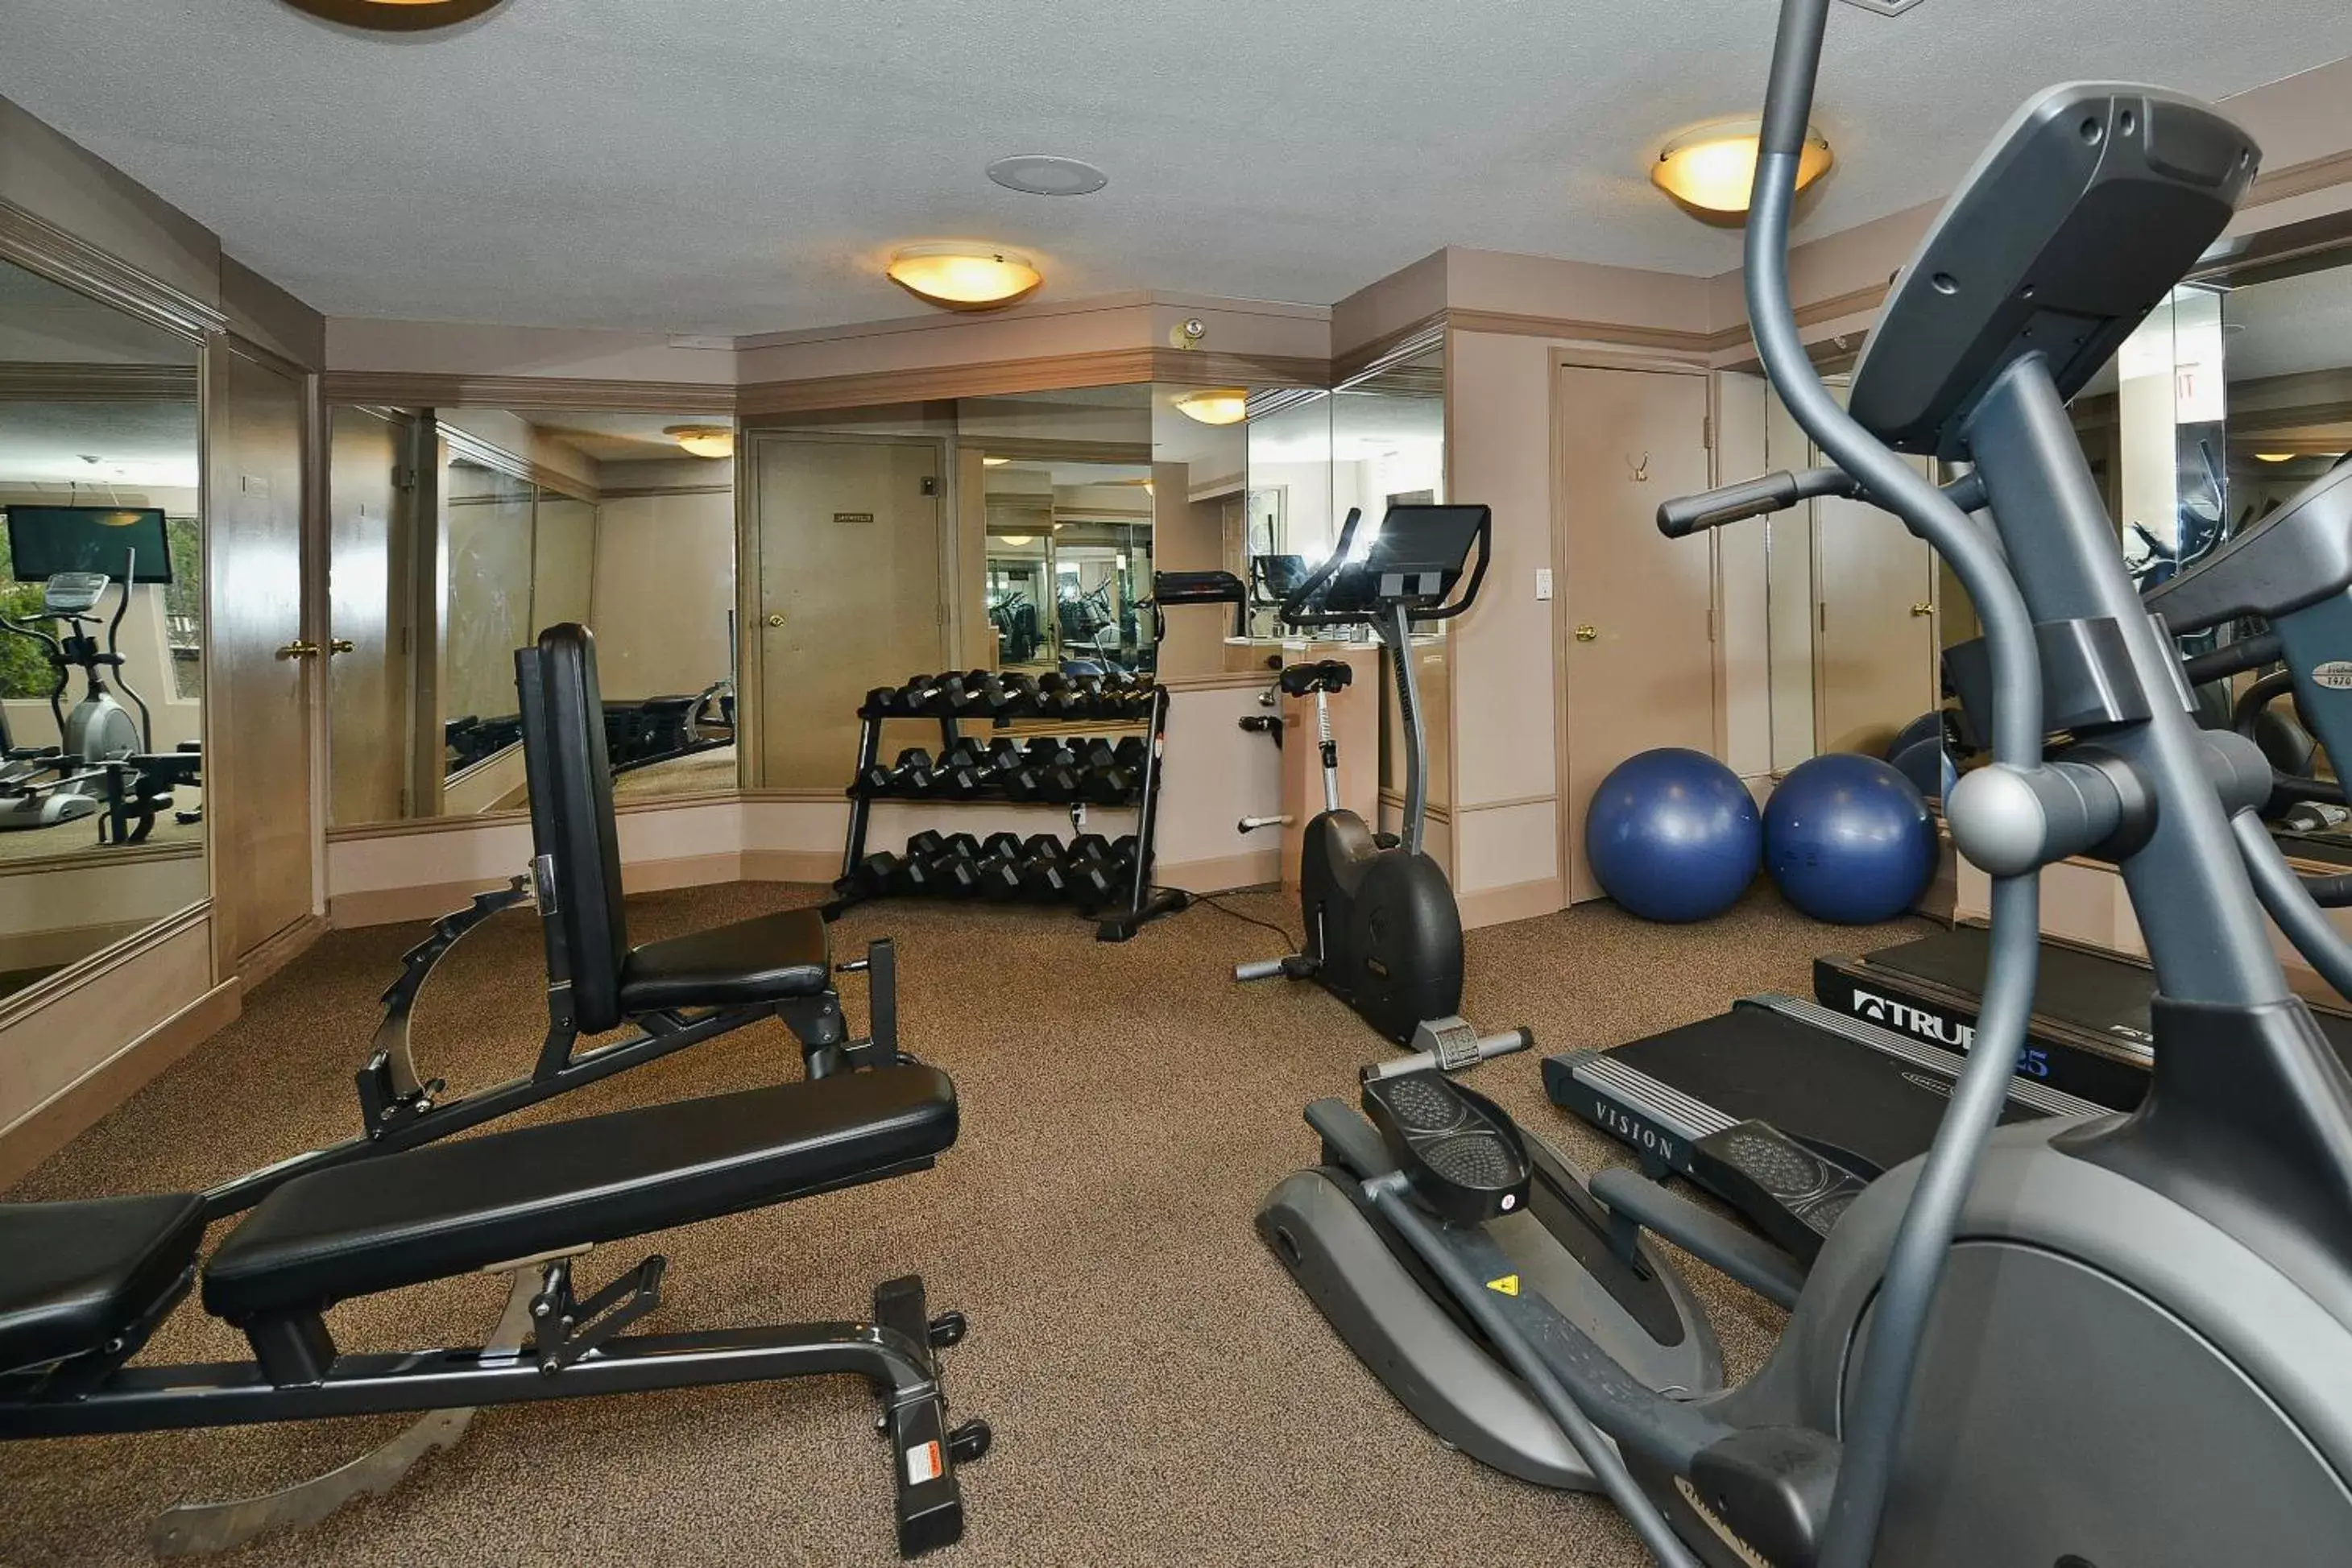 Fitness centre/facilities, Fitness Center/Facilities in Prestige Beach House, WorldHotels Crafted